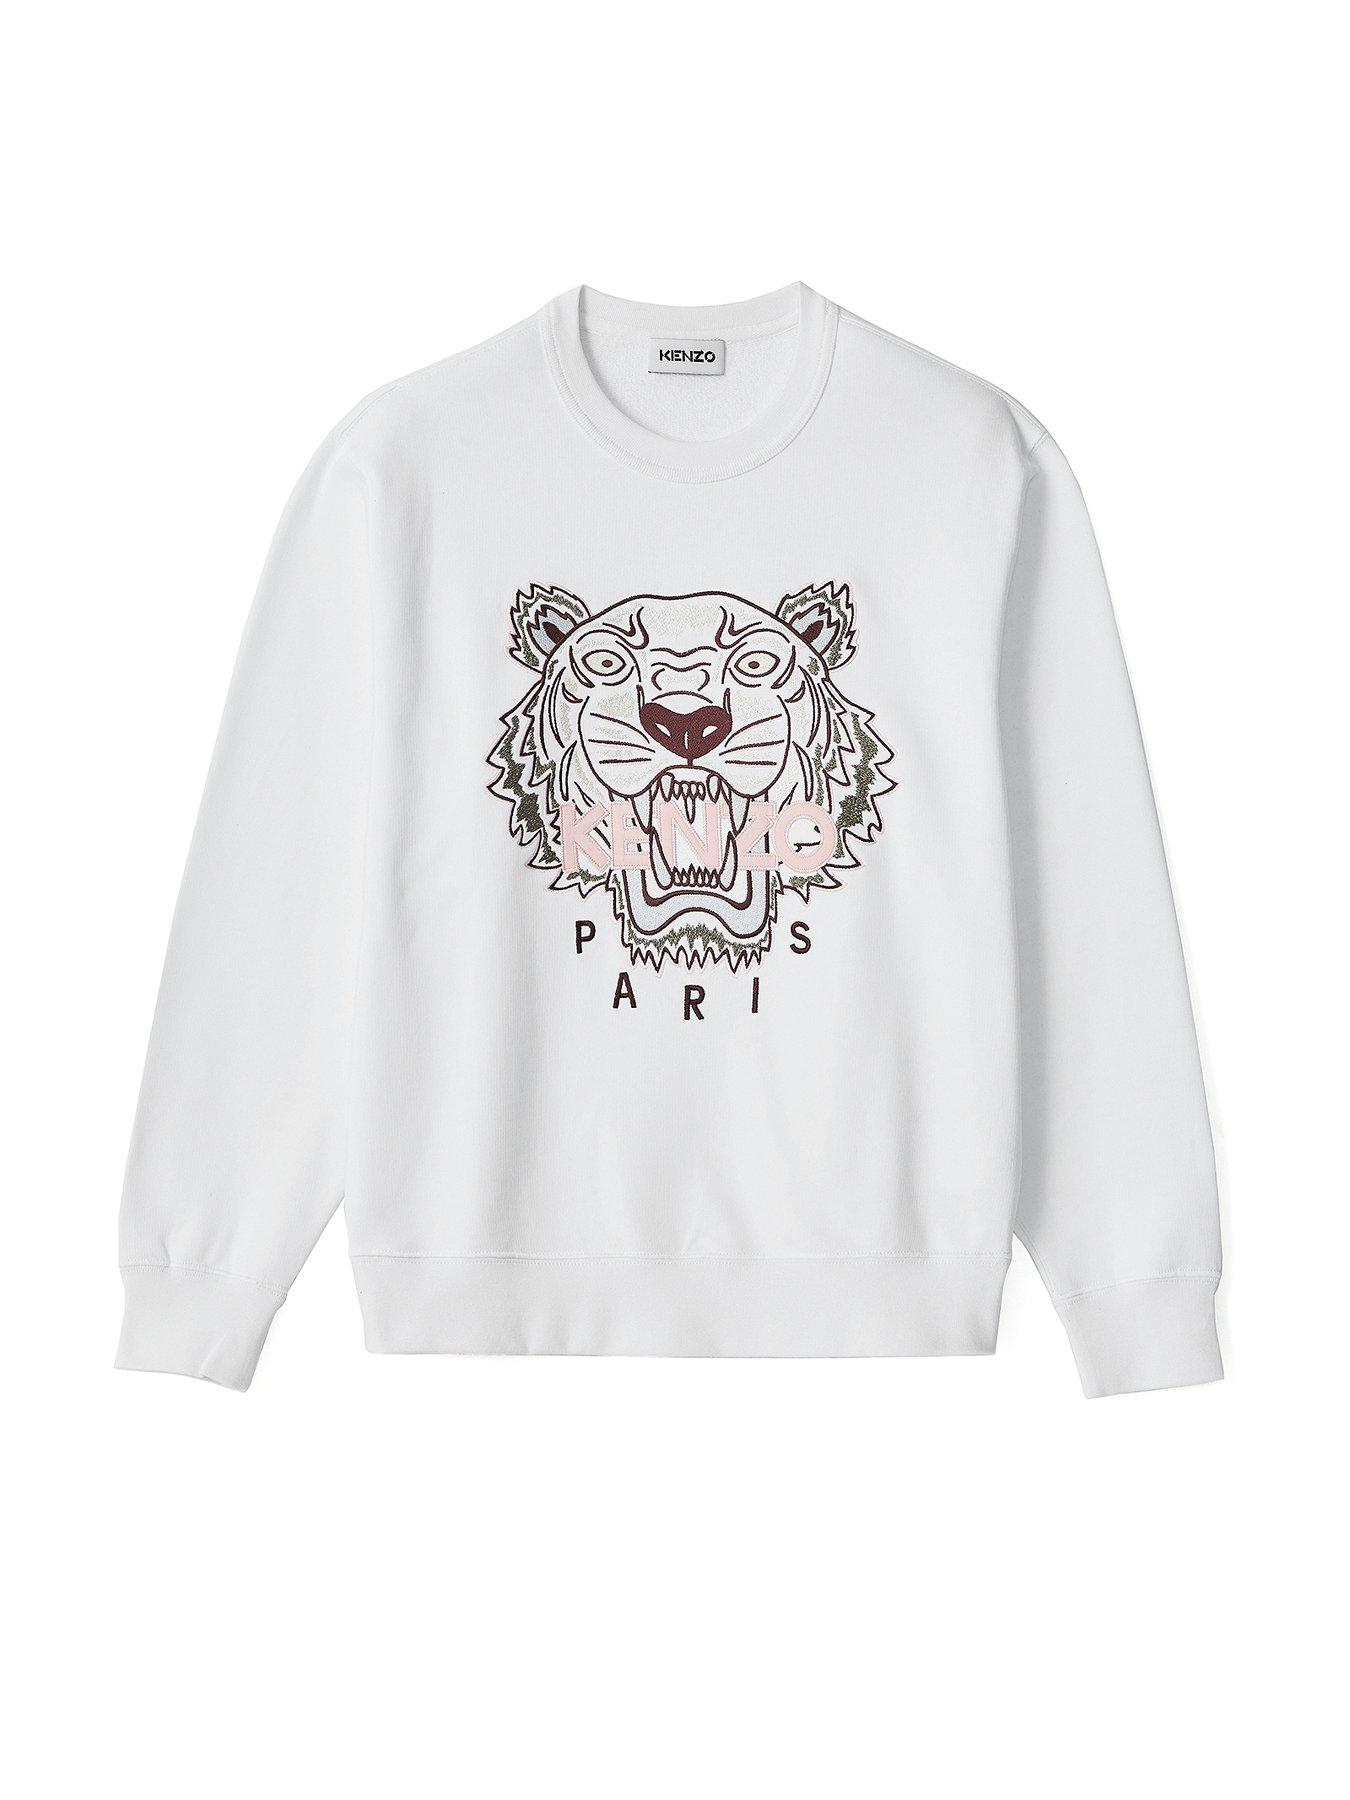 white and silver kenzo jumper